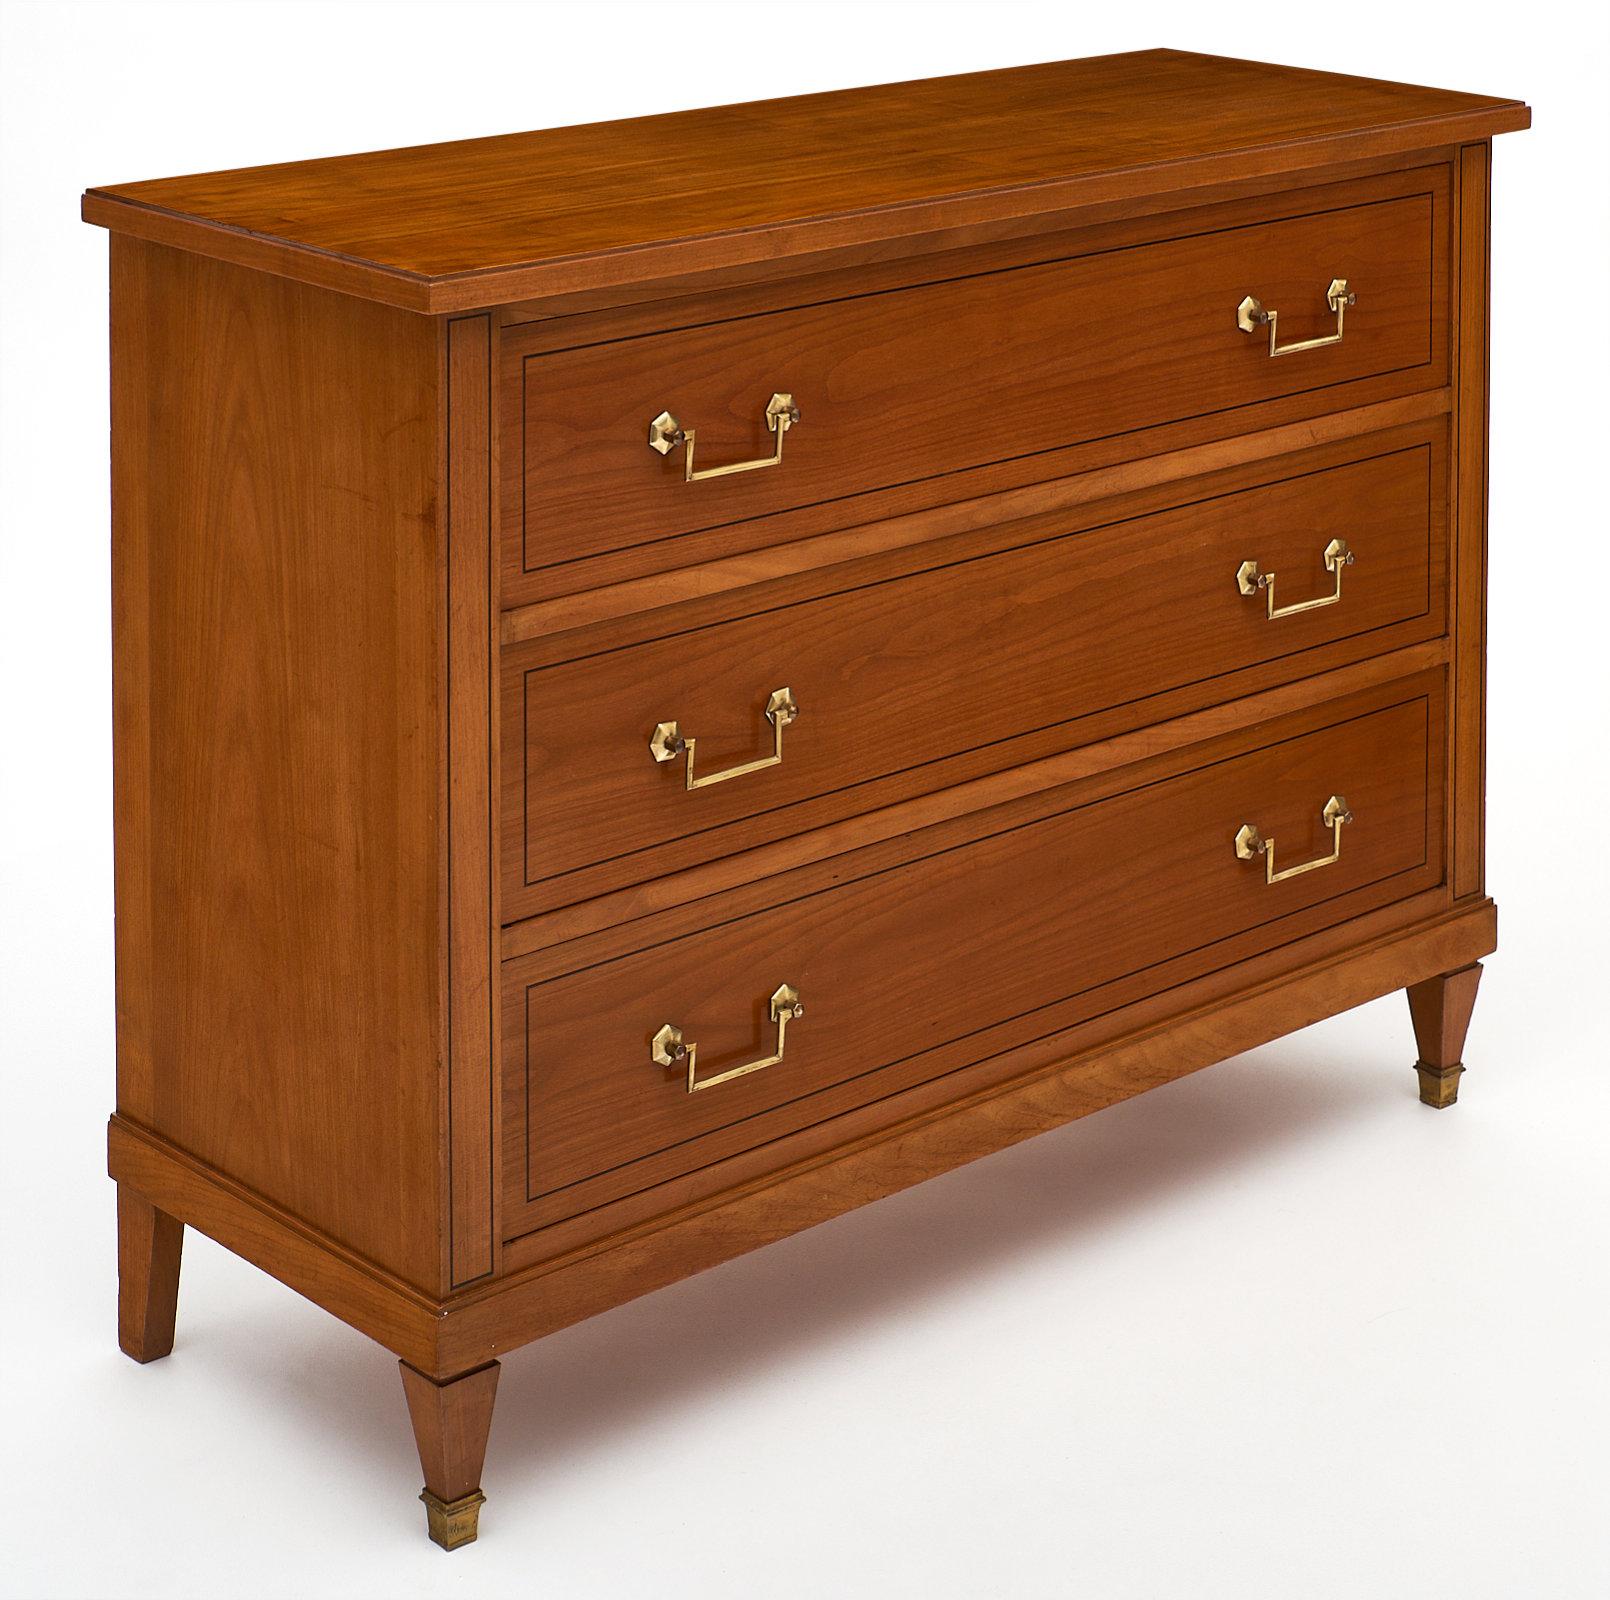 French Directoire style chest of drawers made of cherry wood with three dovetailed drawers and gilt bronze handles and feet. We liked the clean lines, understated feel, and the fine craftsmanship in the ebony inlay details.